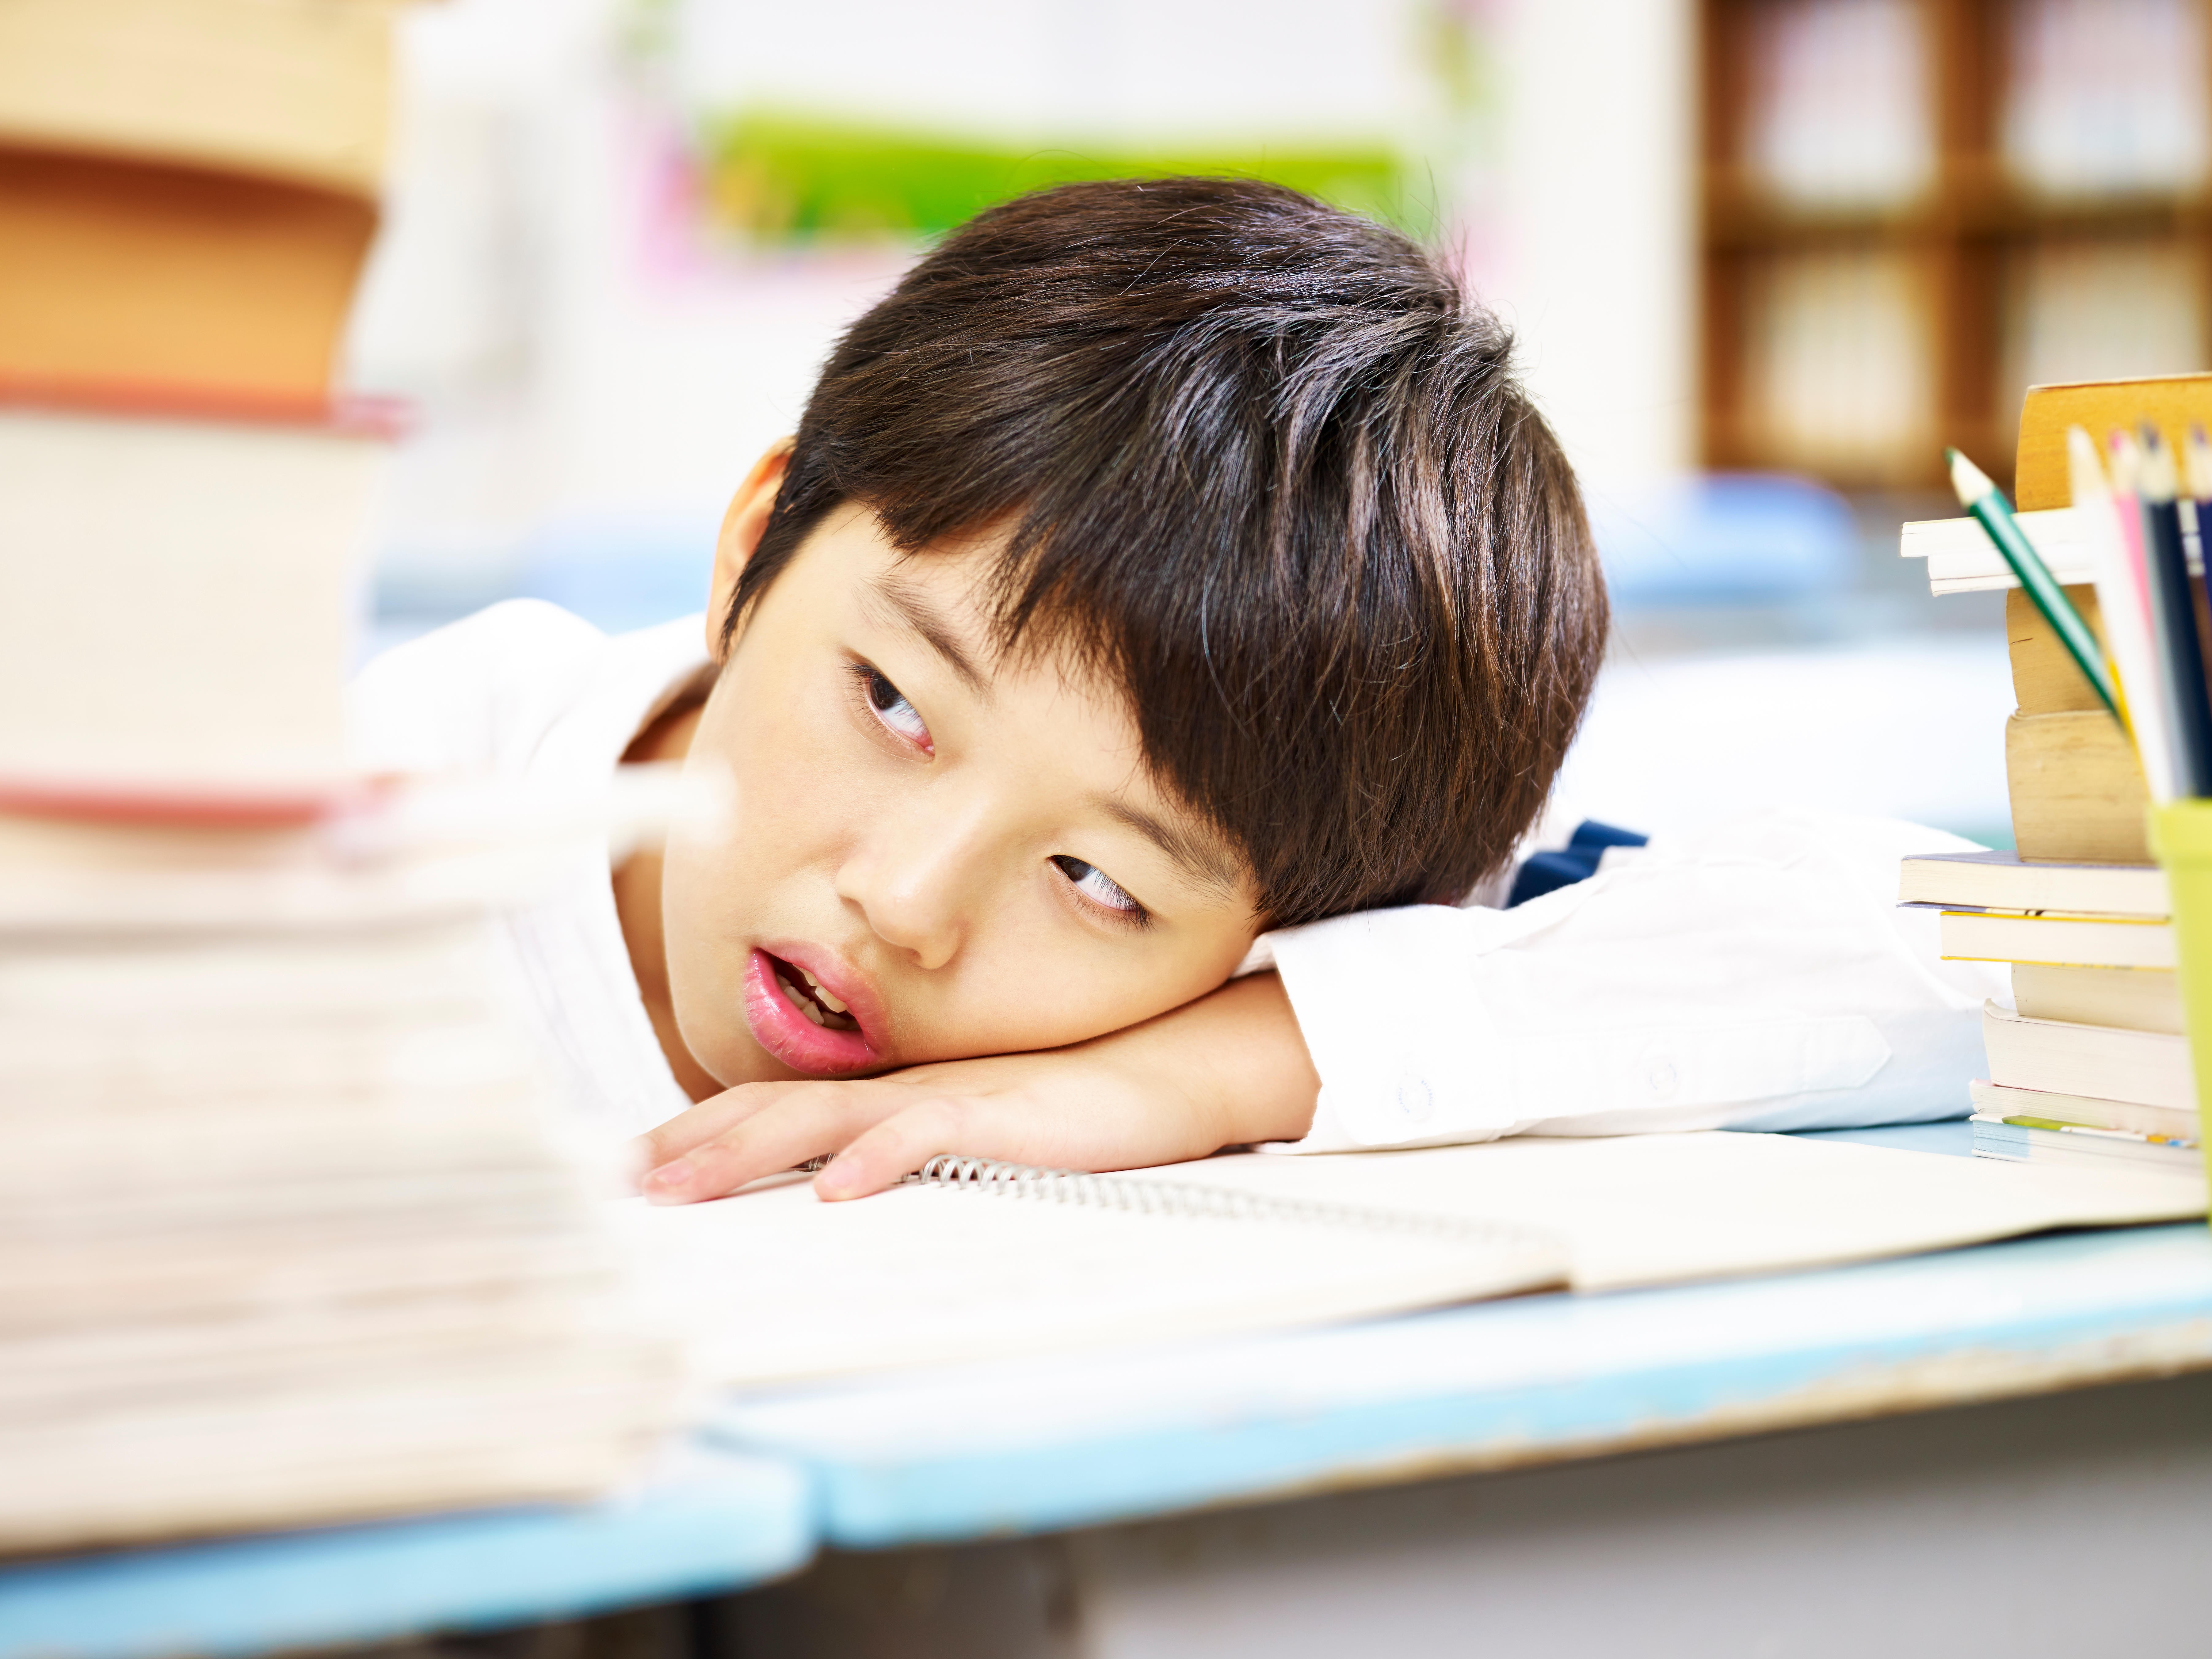 A parent in Hong Kong is worried that their son is not engaged in the classroom. Photo: Alamy